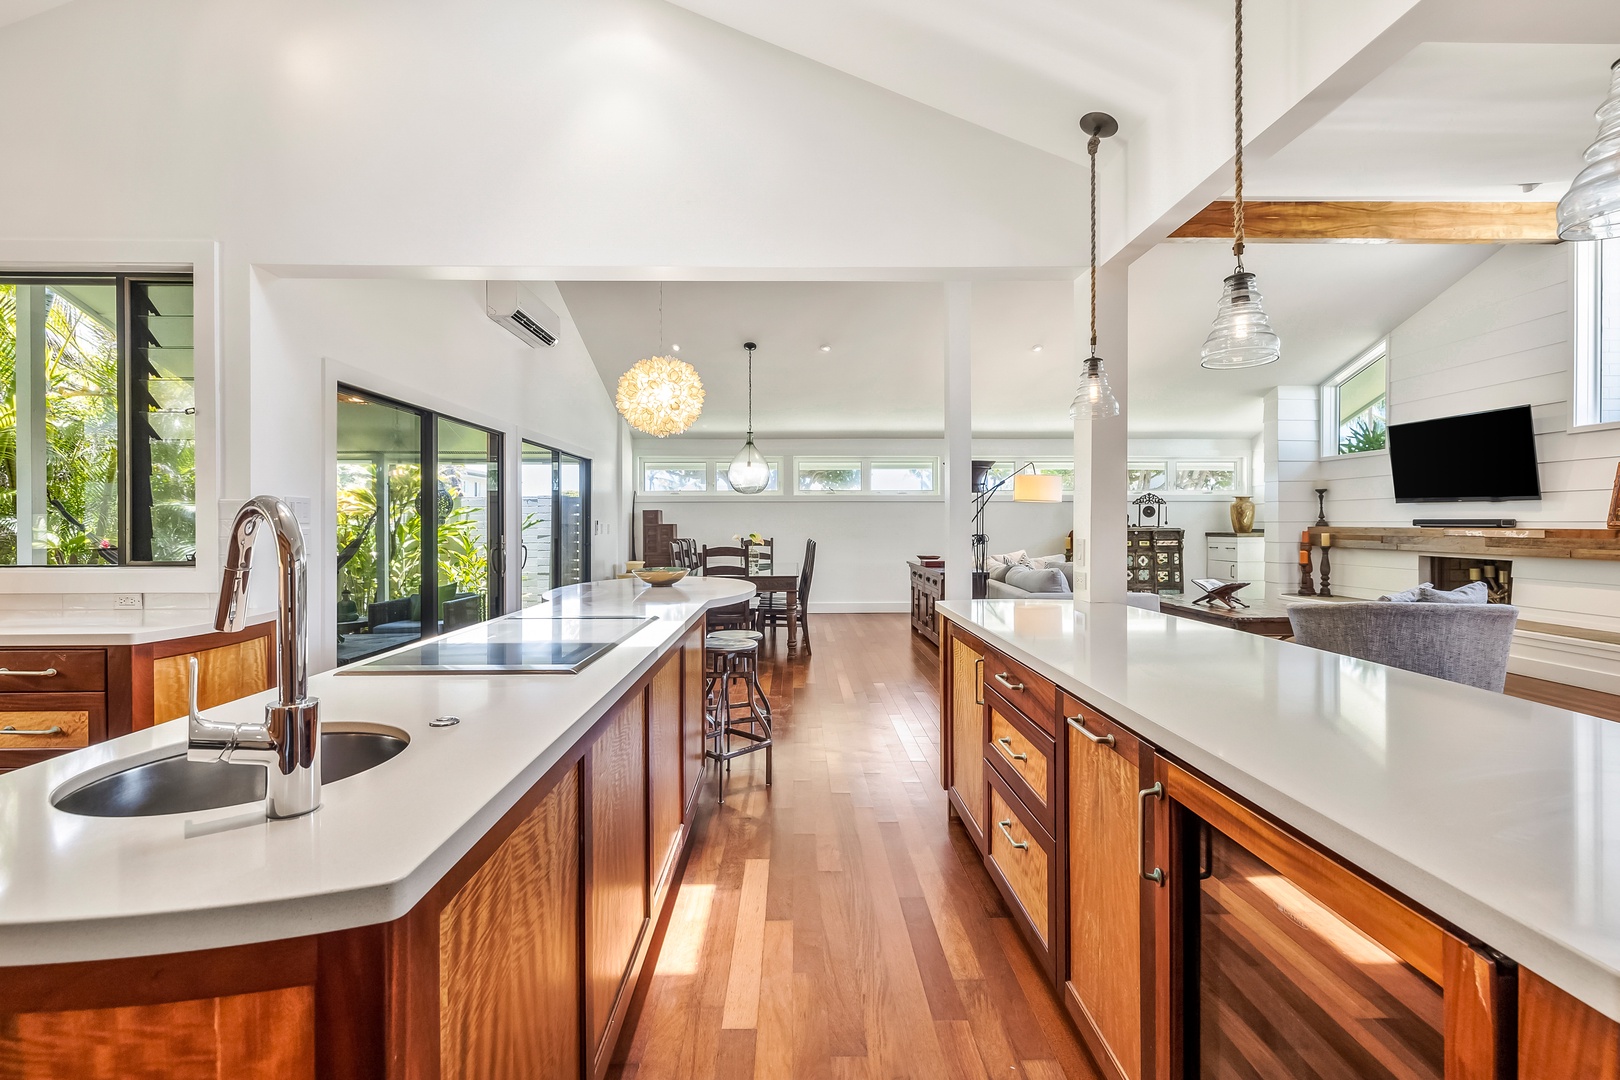 Kailua Vacation Rentals, Hale Ohana - There's plenty of space throughout the kitchen if you'd like to keep the chef company